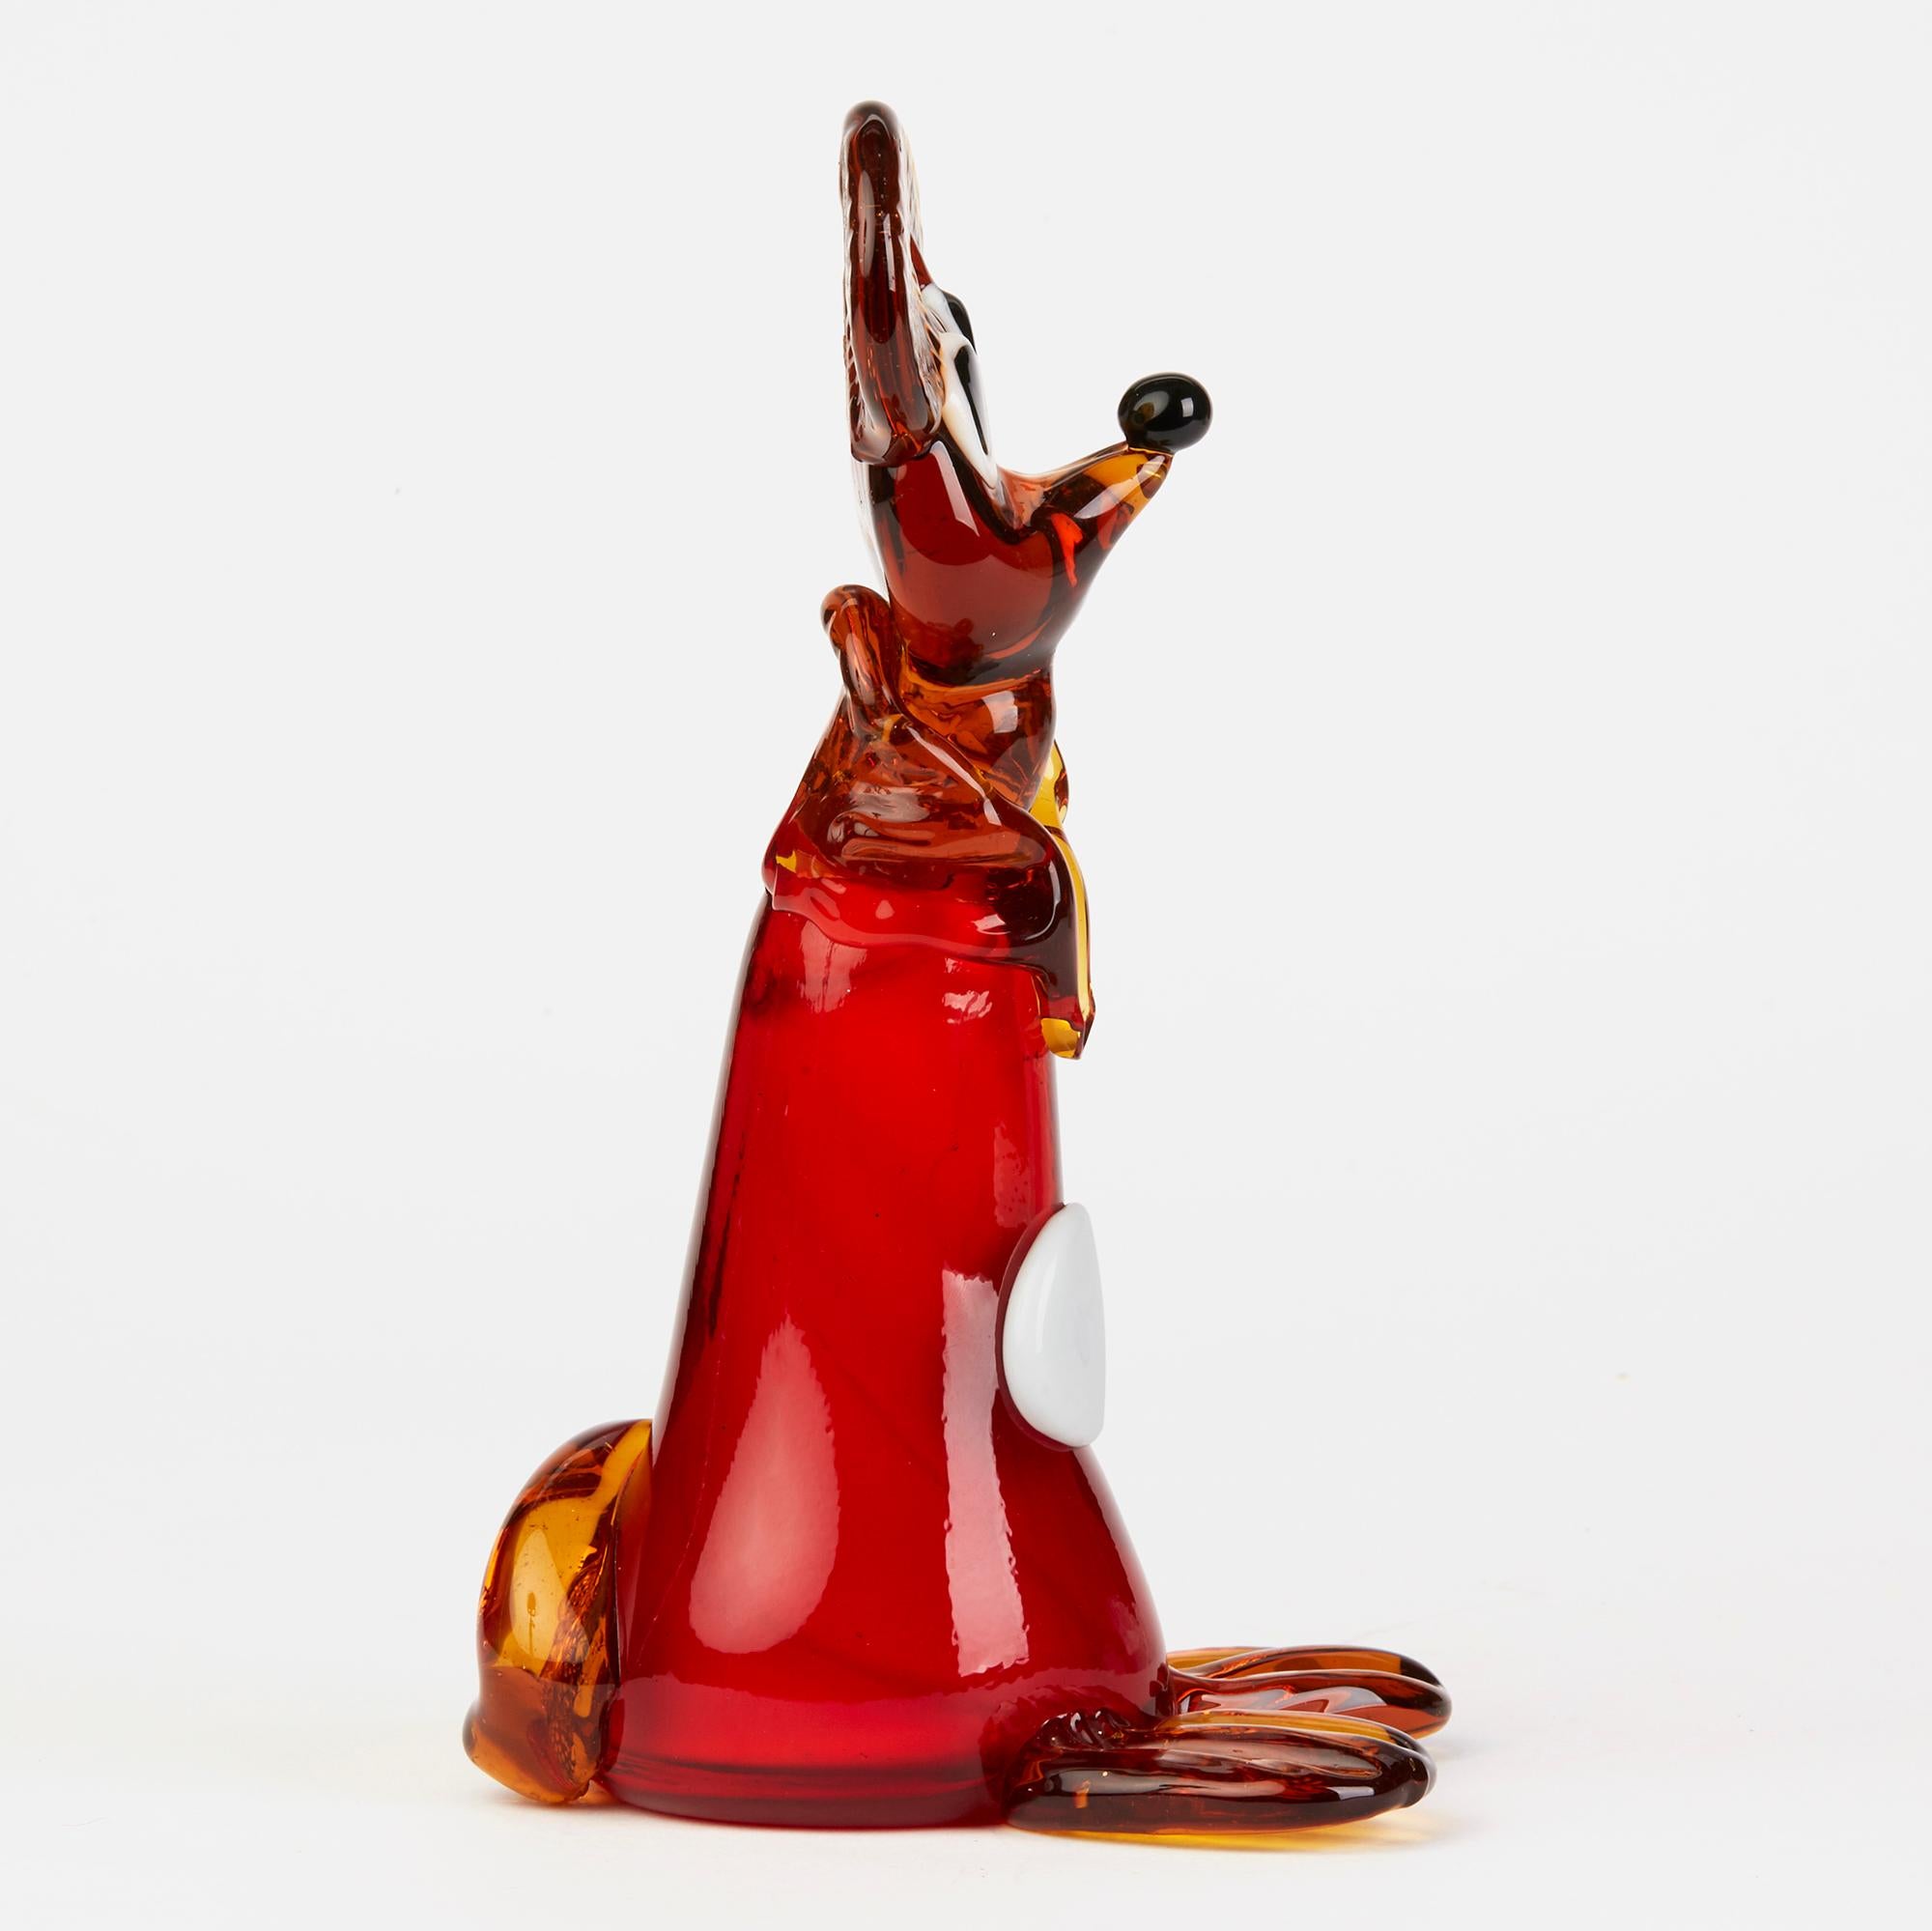 Hand-Crafted Murano Venetian Vintage Glass Mouse Figure, 1950s-1960s For Sale